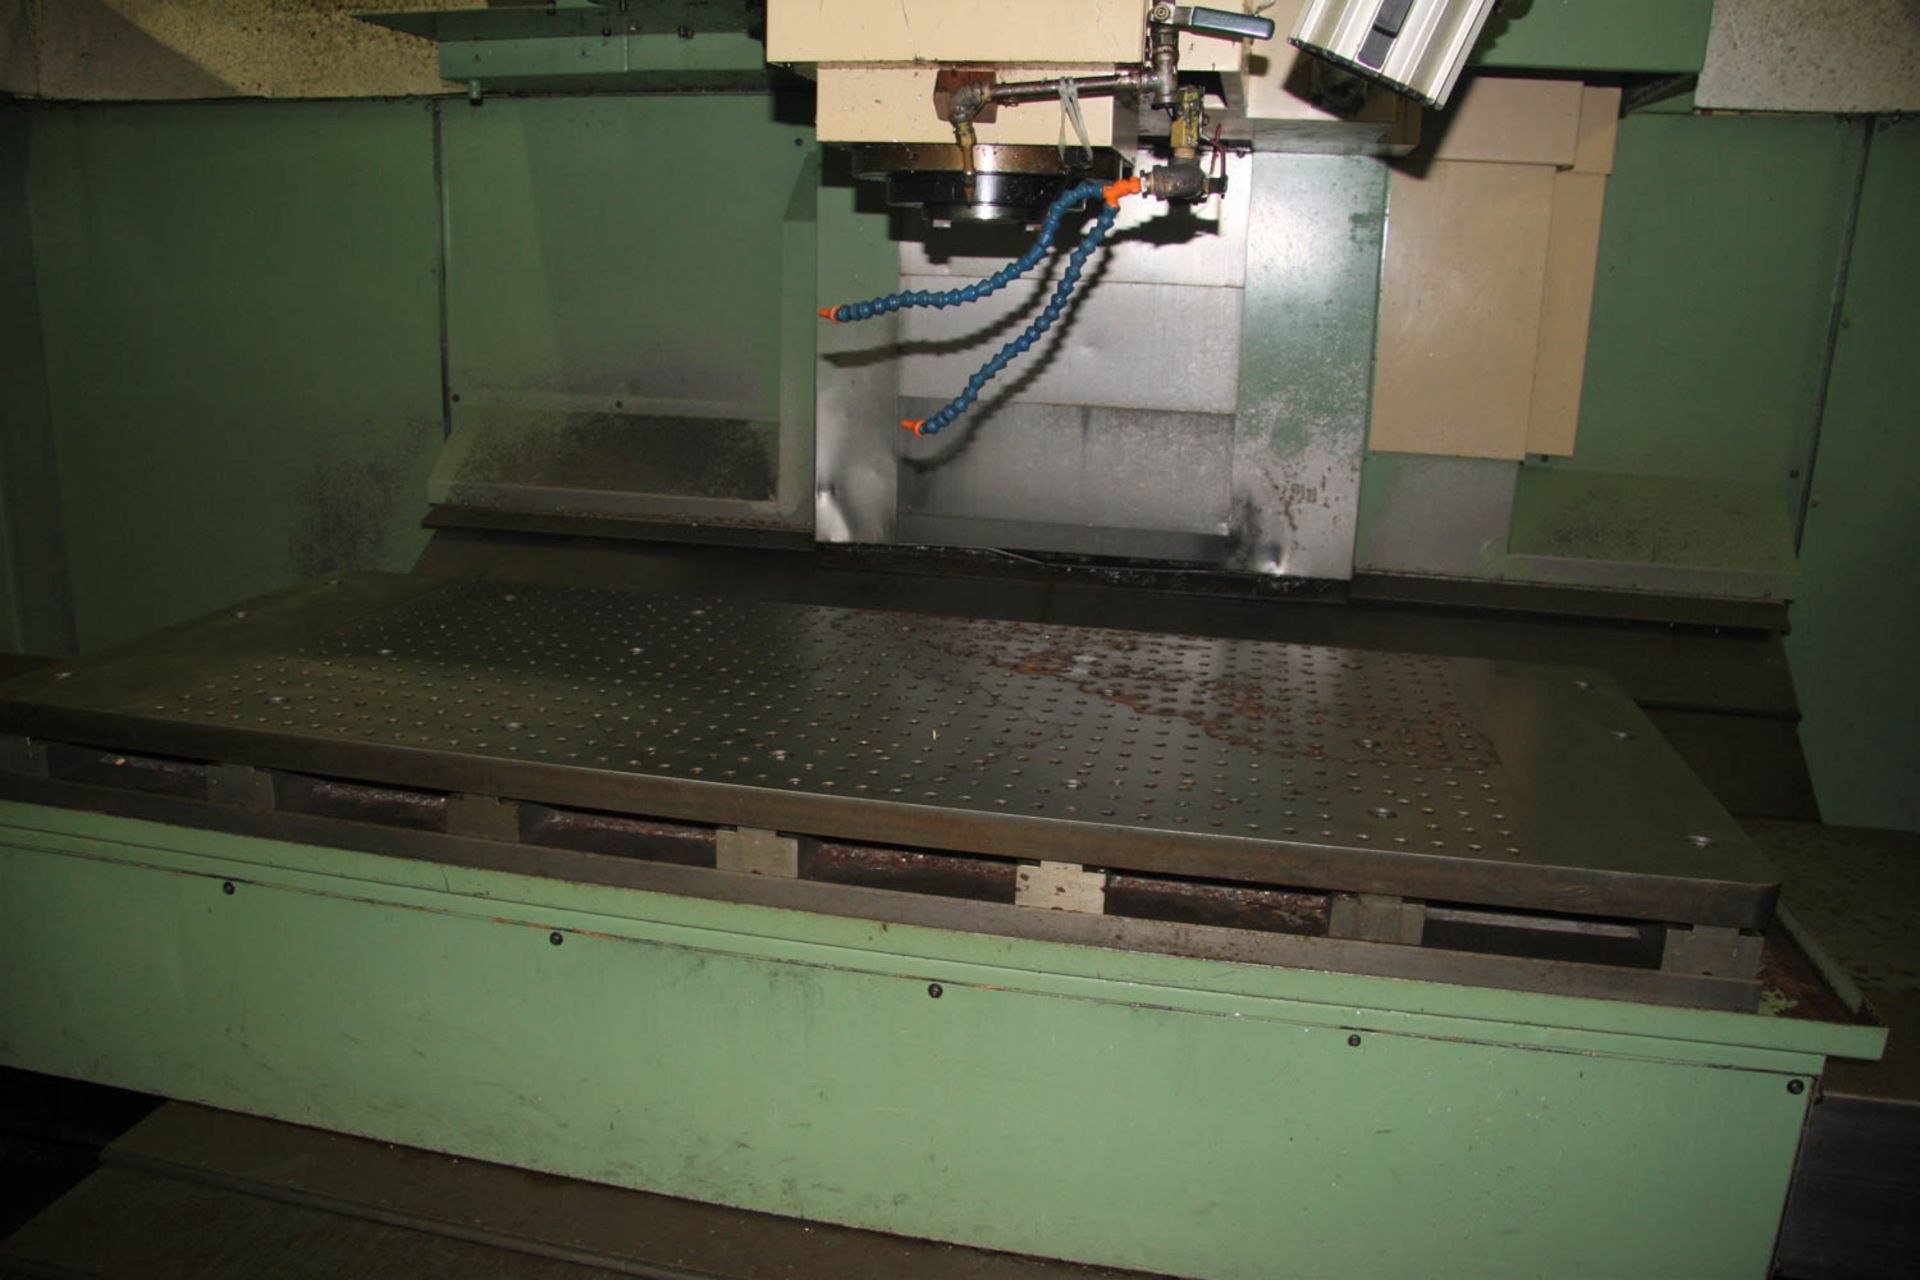 MORI SEIKI MV-65/50 VERTICAL MACHINING CENTER, #50 TAPER, 27-1/2" X 67" TABLE WITH SUB-TABLE, - Image 3 of 10